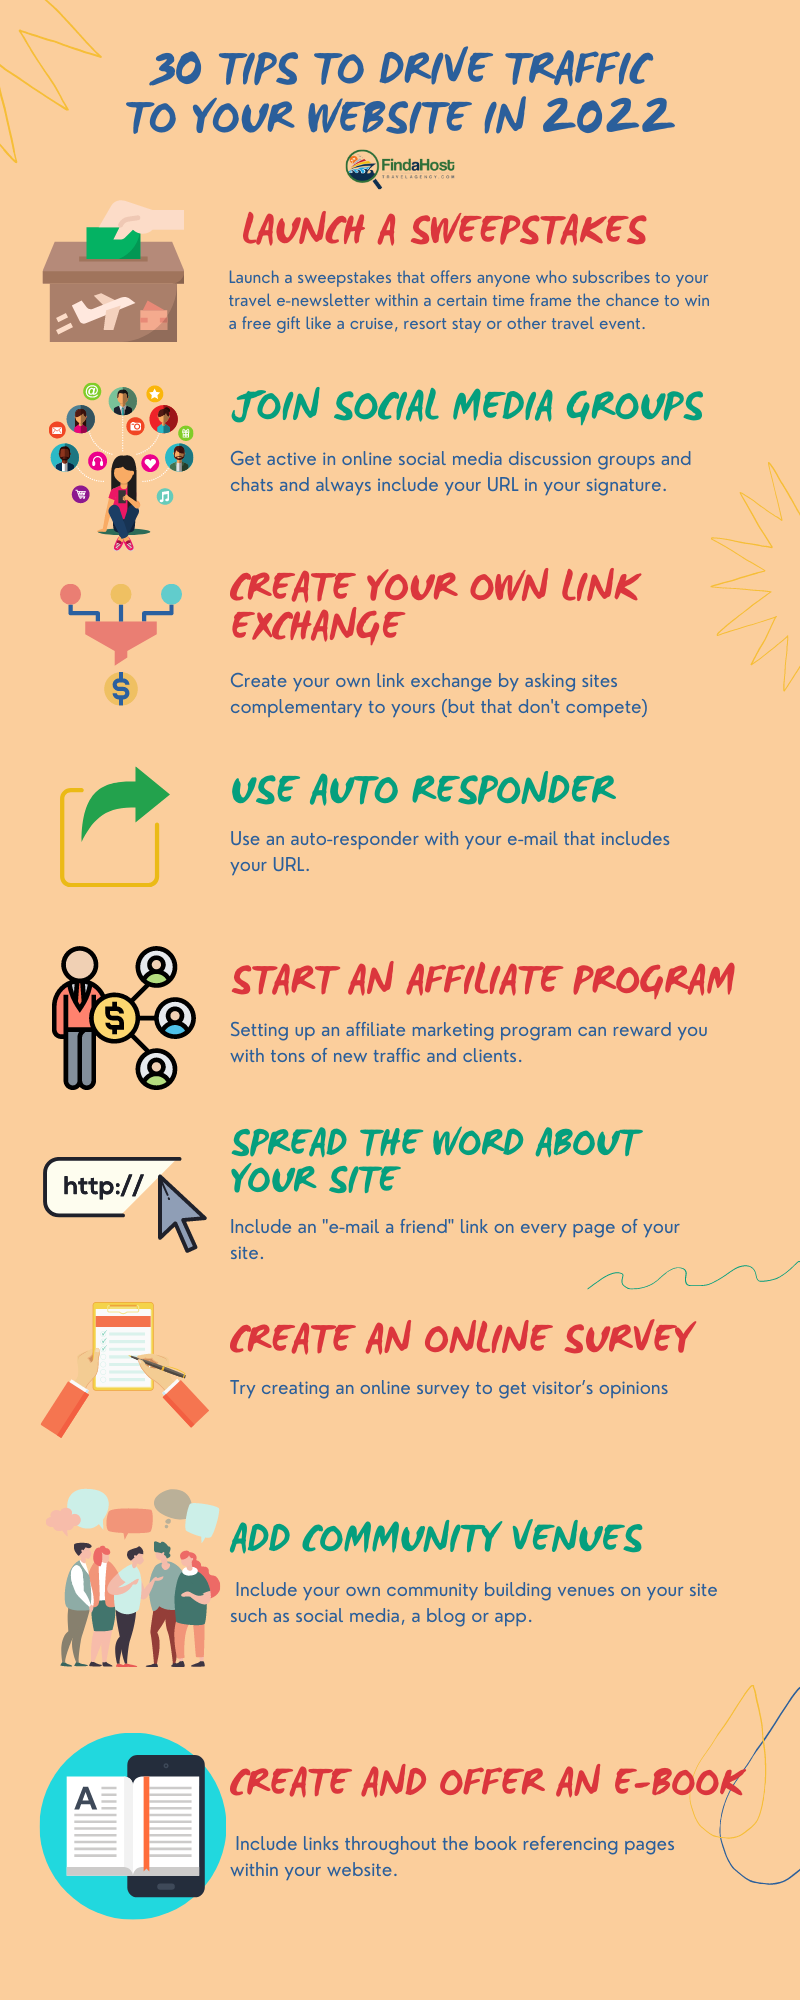 30 Tips to Drive Traffic to Your Website in 2022 Infographic 2 - FAHTA